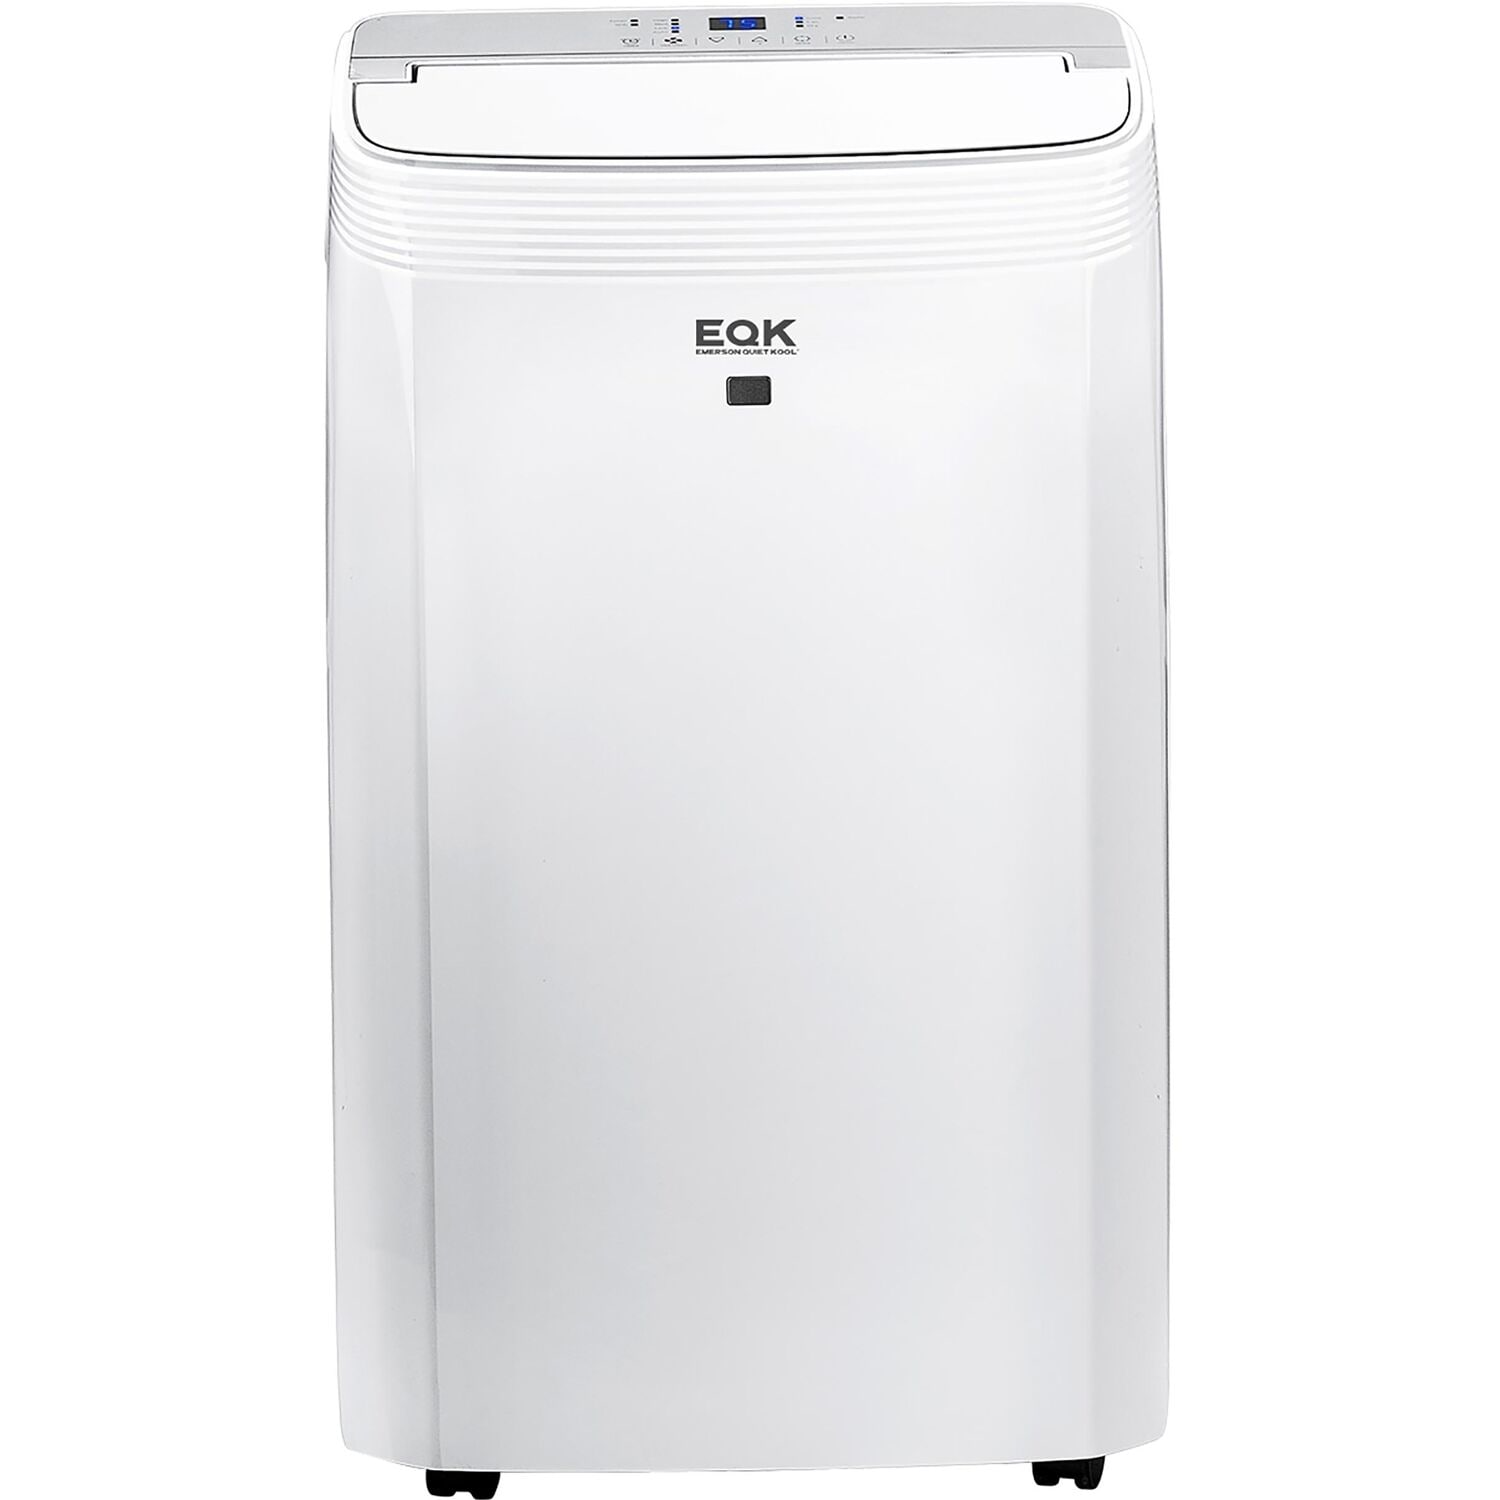 NewAir 270 Sq. Ft Portable Air Conditioner White NAC14KWH03 - Best Buy